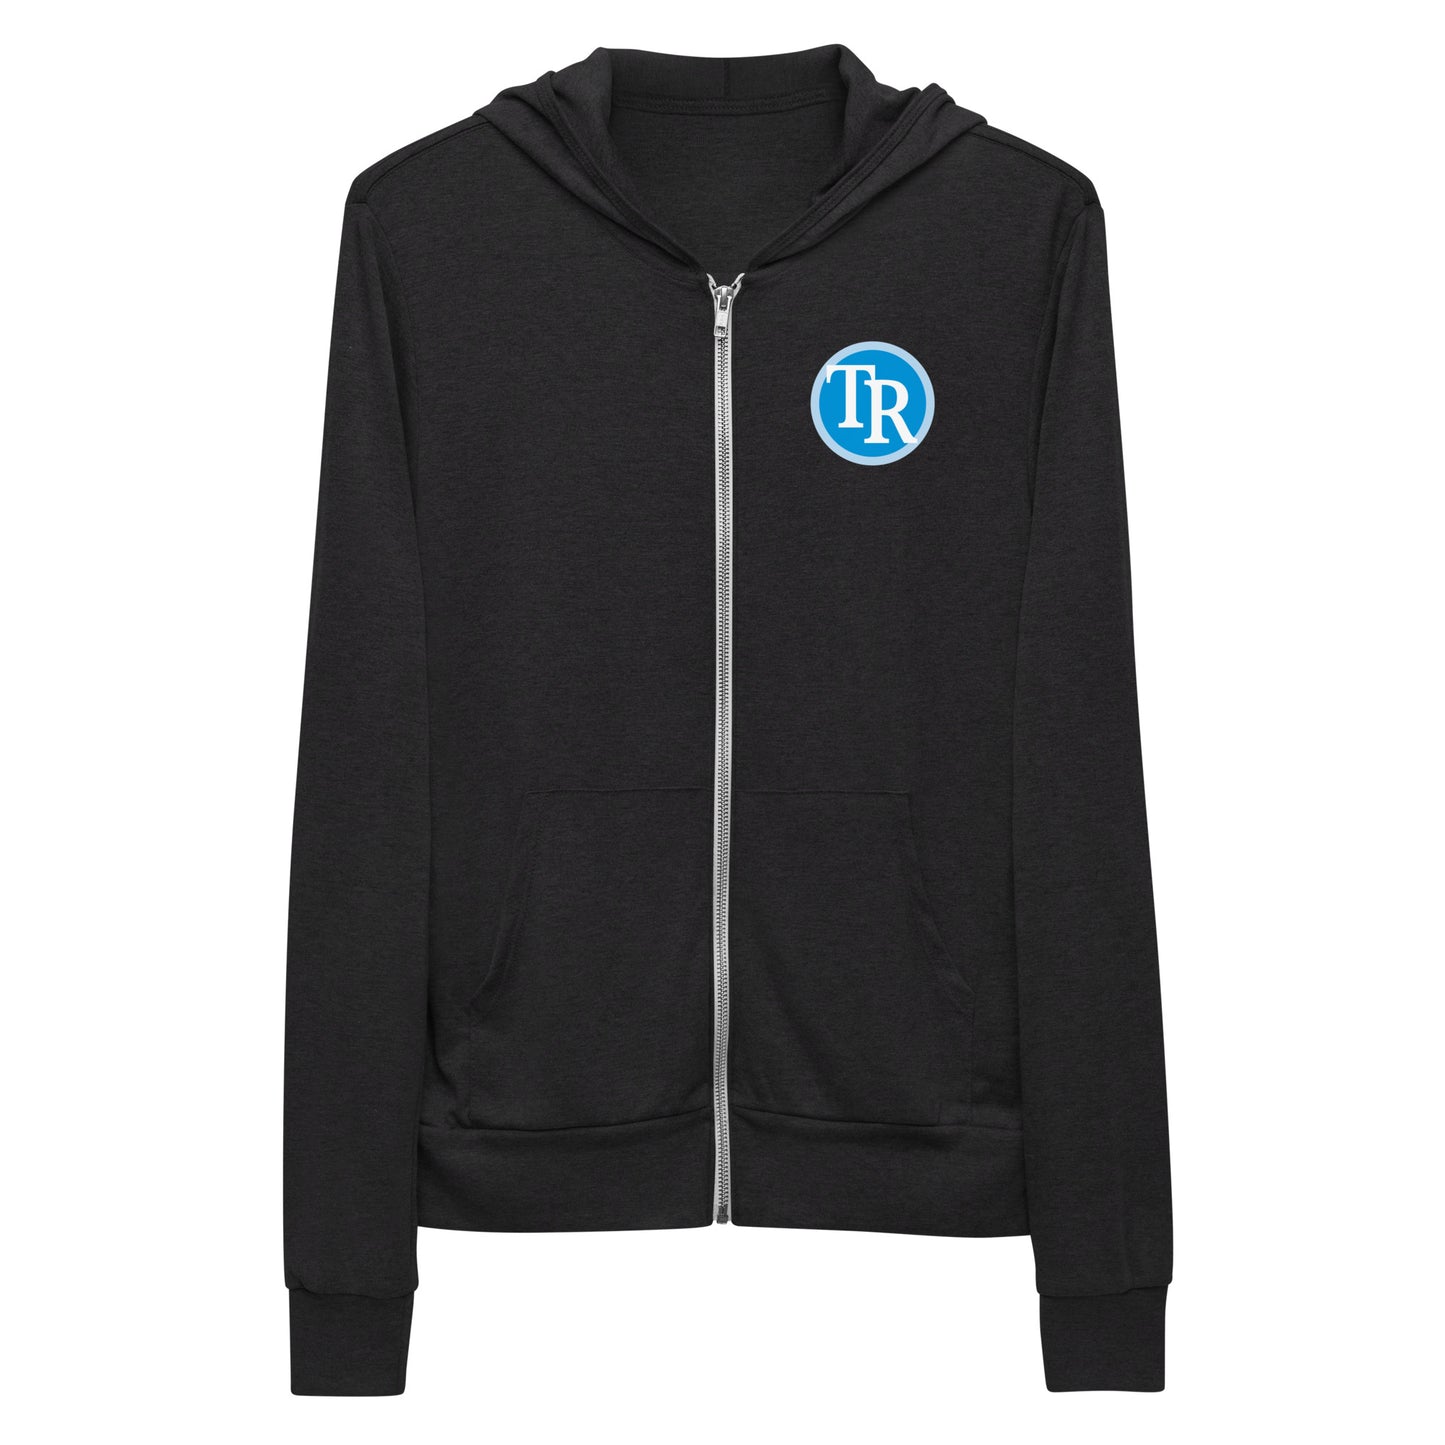 The Times Record Unisex Zip Hoodie